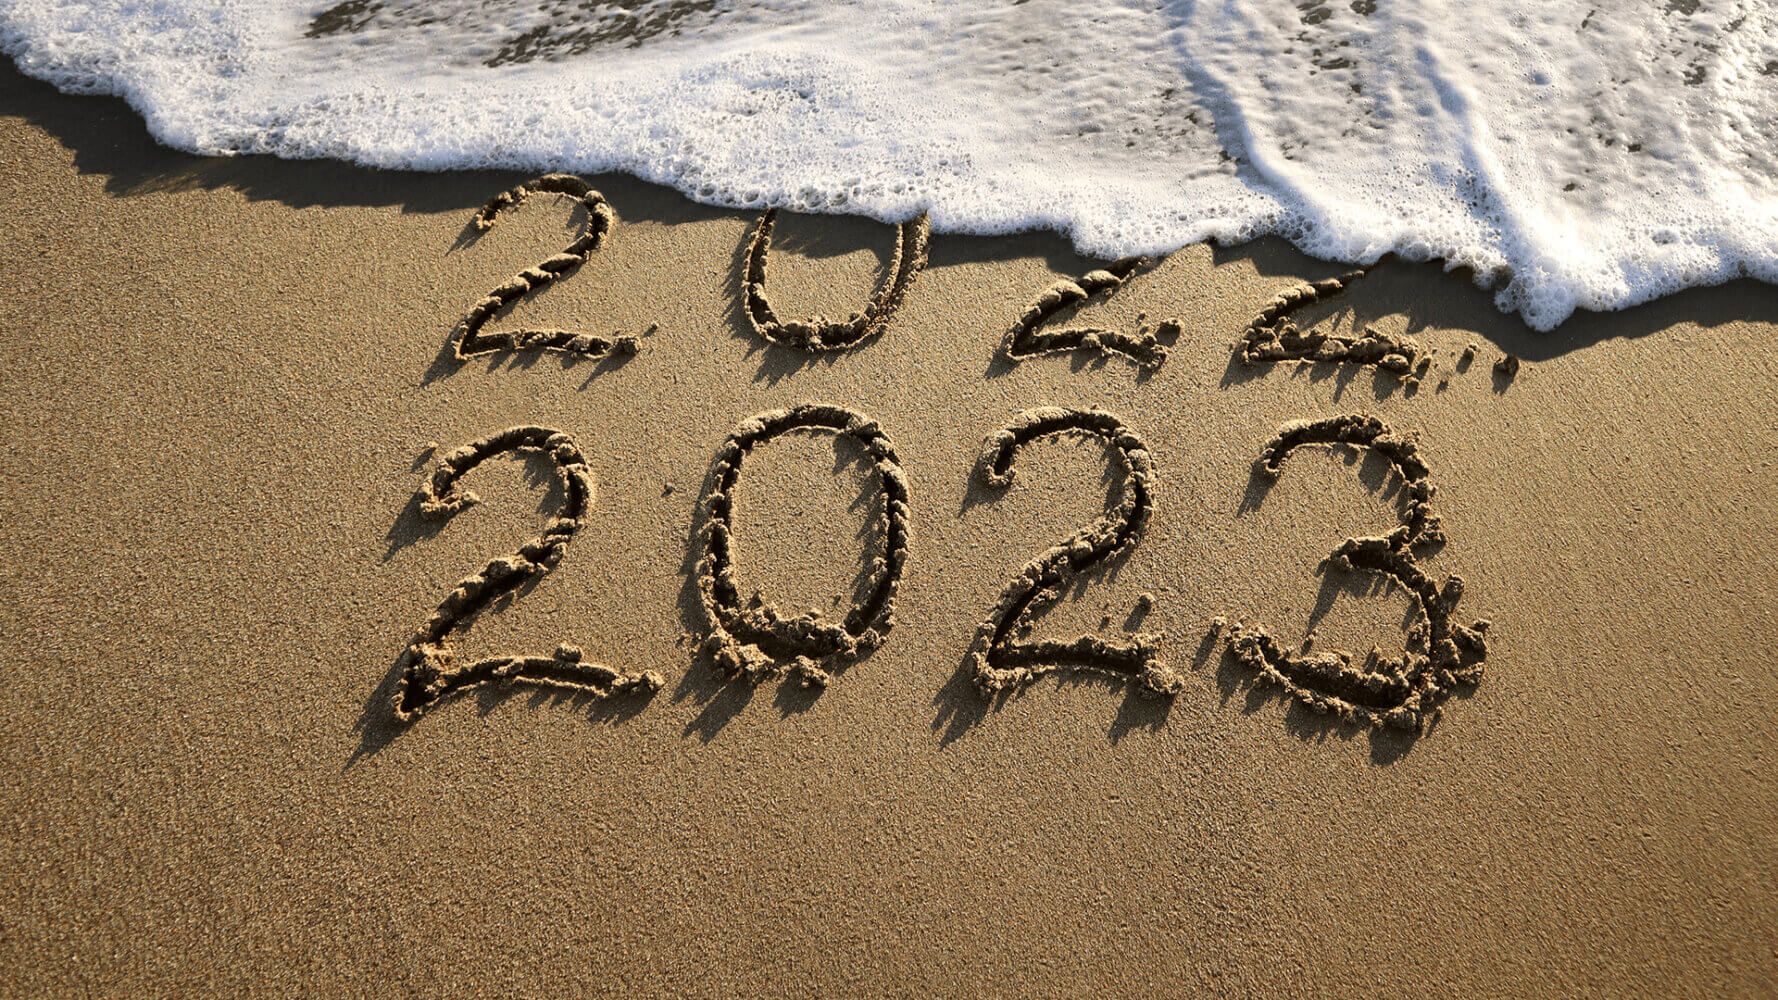 2022 is washed away by the New Year, 2023.